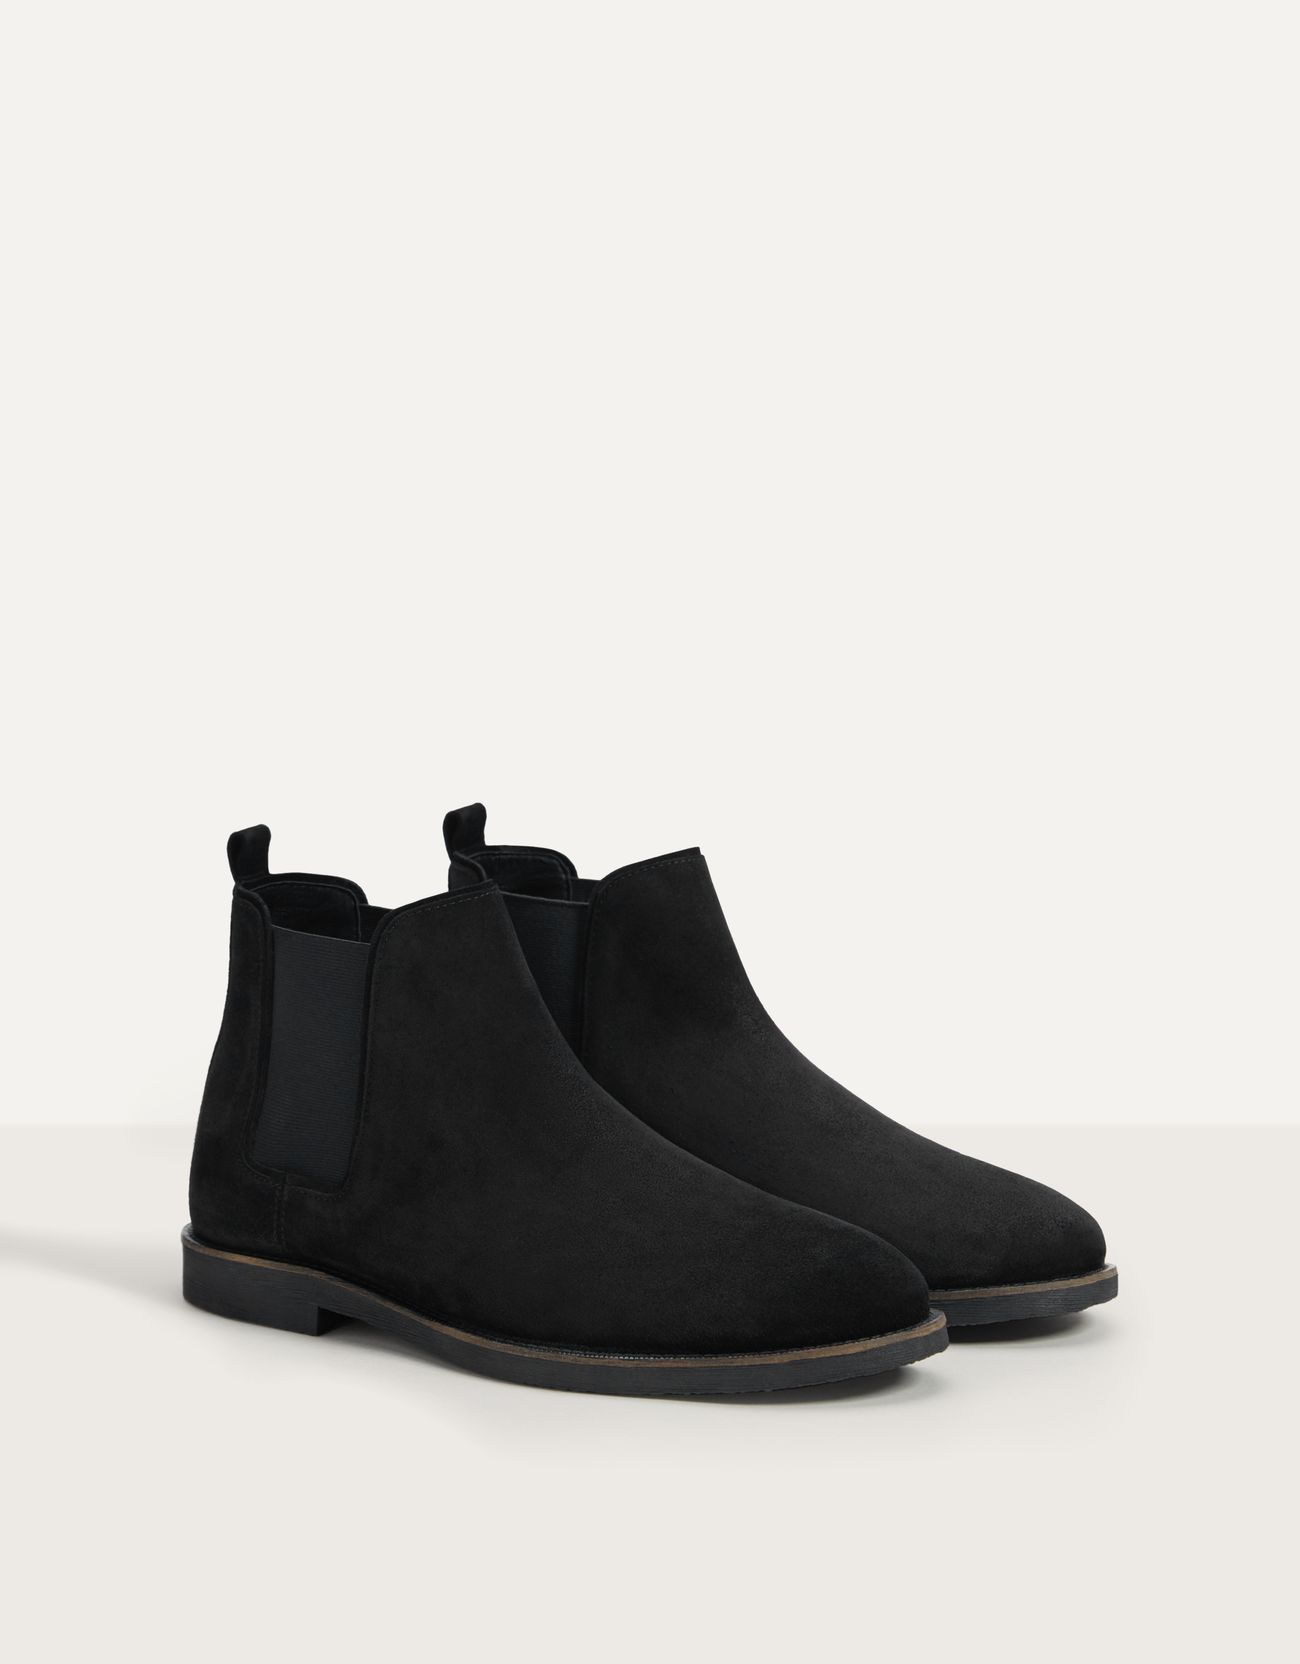 Men's LEATHER ankle boots with gores 